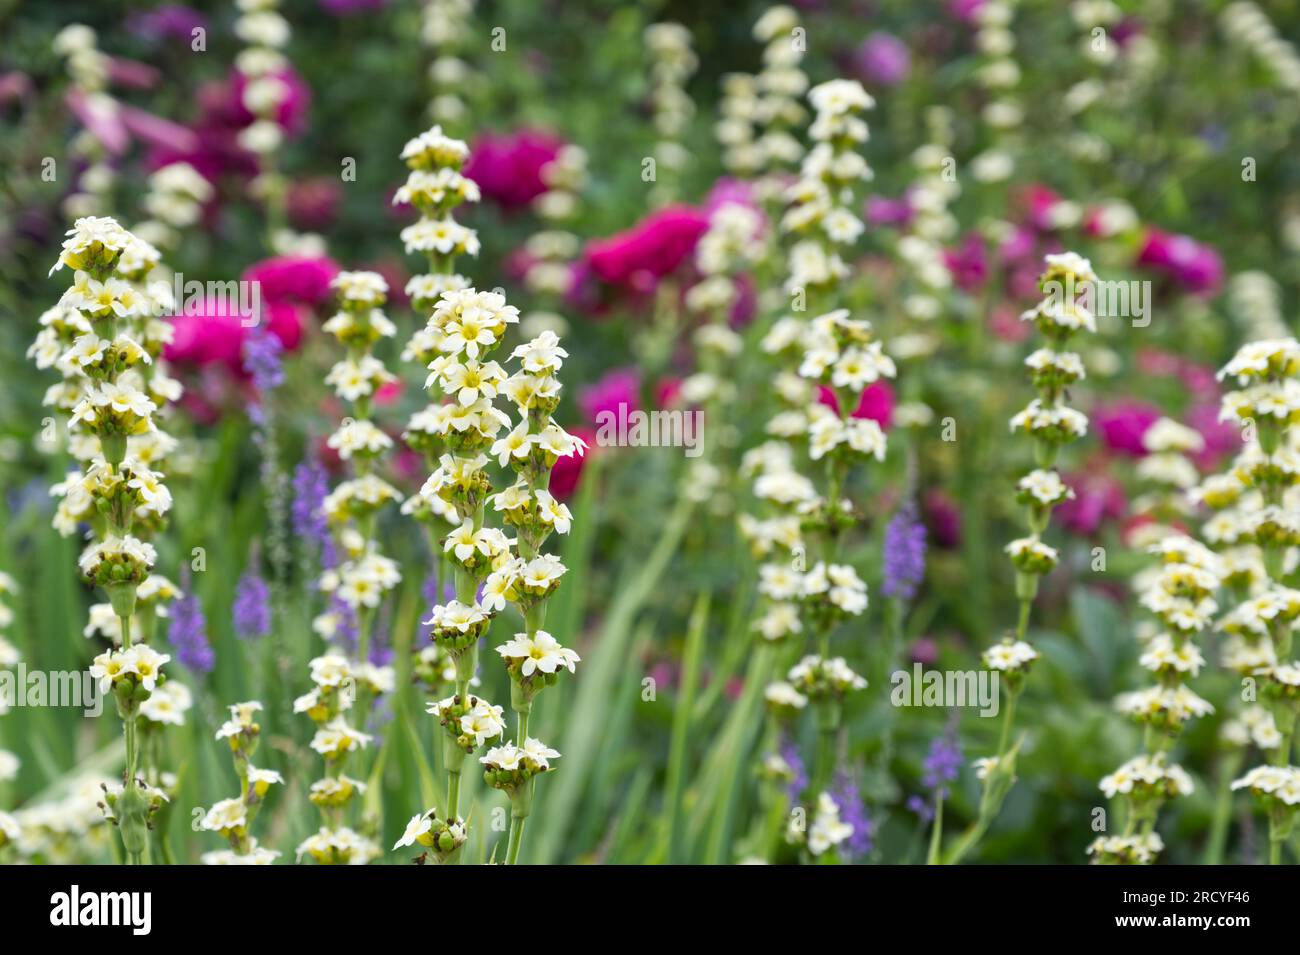 Summer flower border with pale yellow flowers of Sisyrinchium striatum in front of old pink roses and purple toadflax Linaria purpurea UK garden June Stock Photo